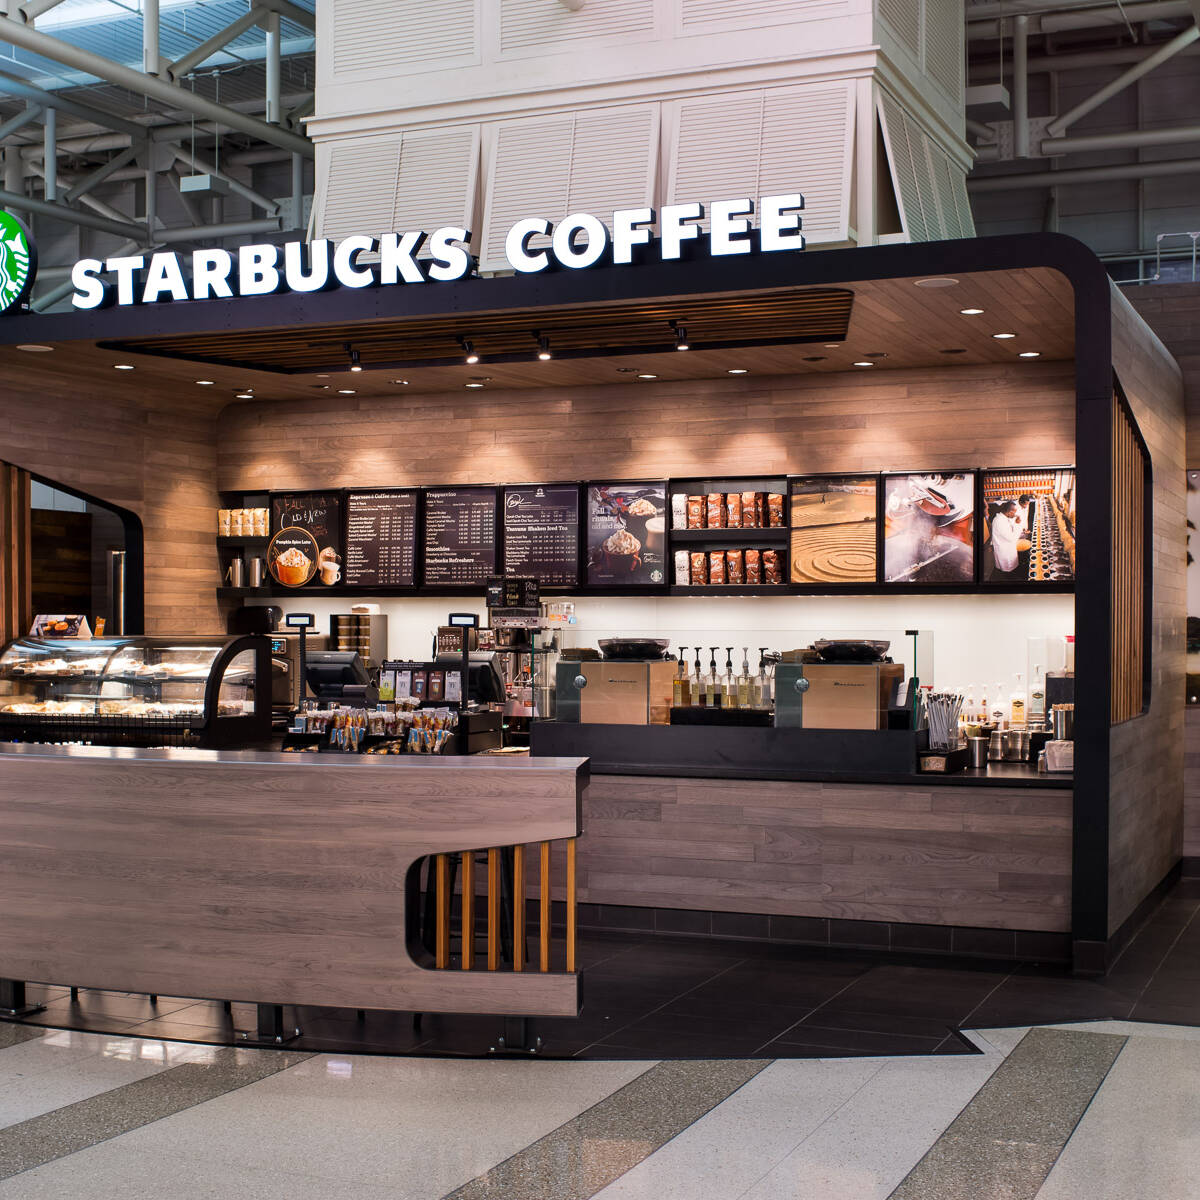 a starbucks coffee shop in an airport photographed by interiors photographer in Charlotte, North Carolina